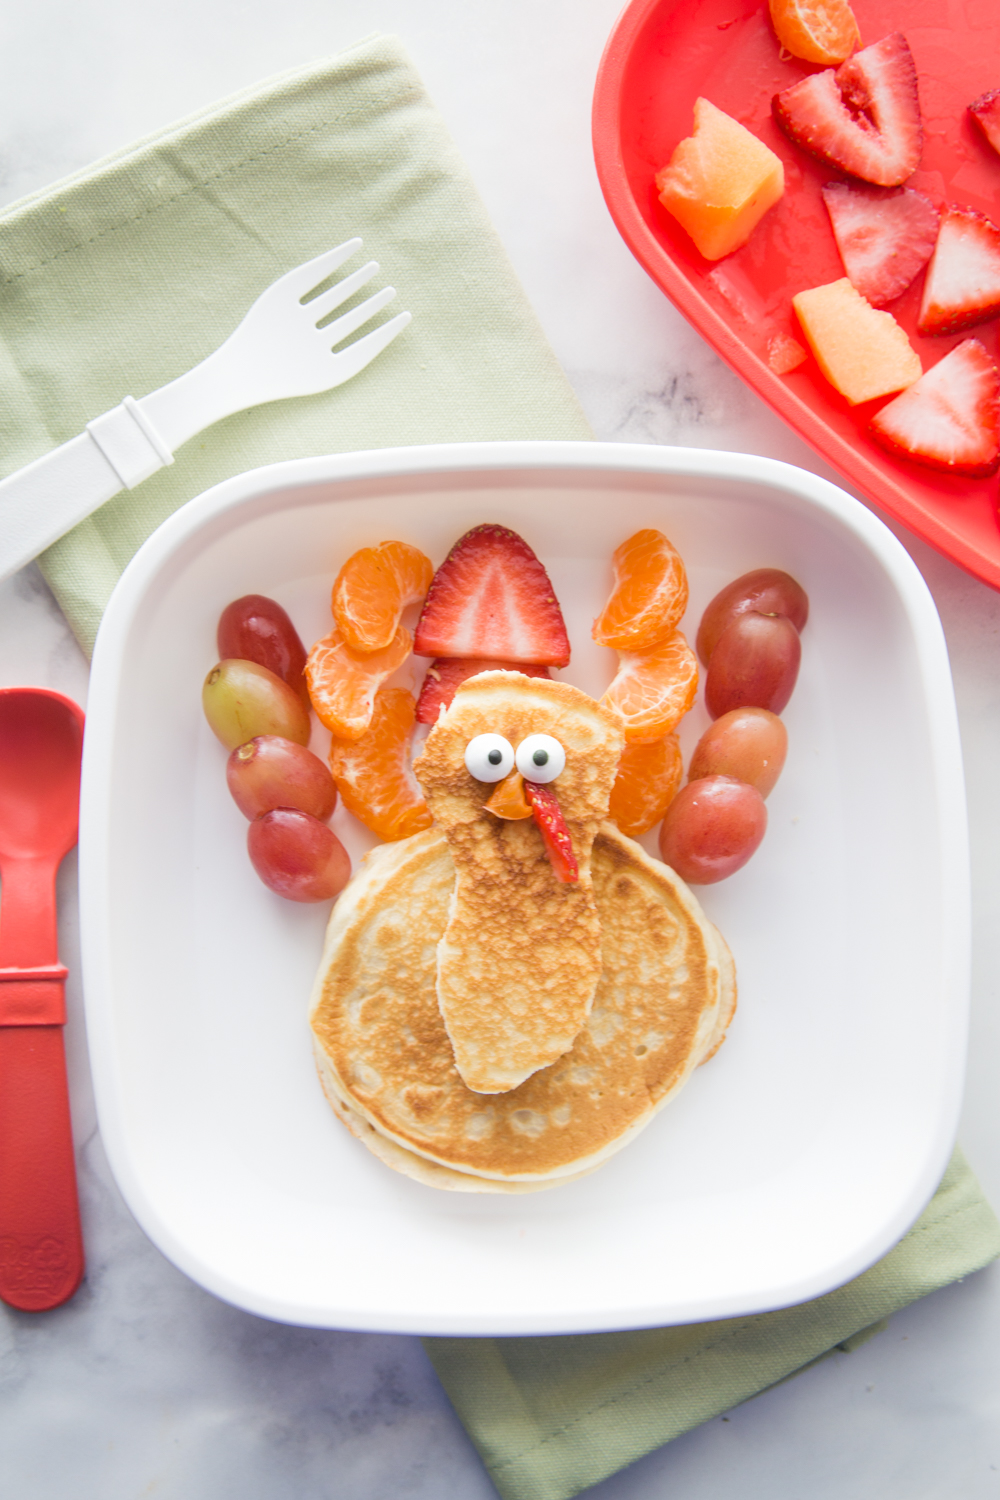 This friendly Turkey Pancake Breakfast is a fun way to celebrate Thanksgiving Day!